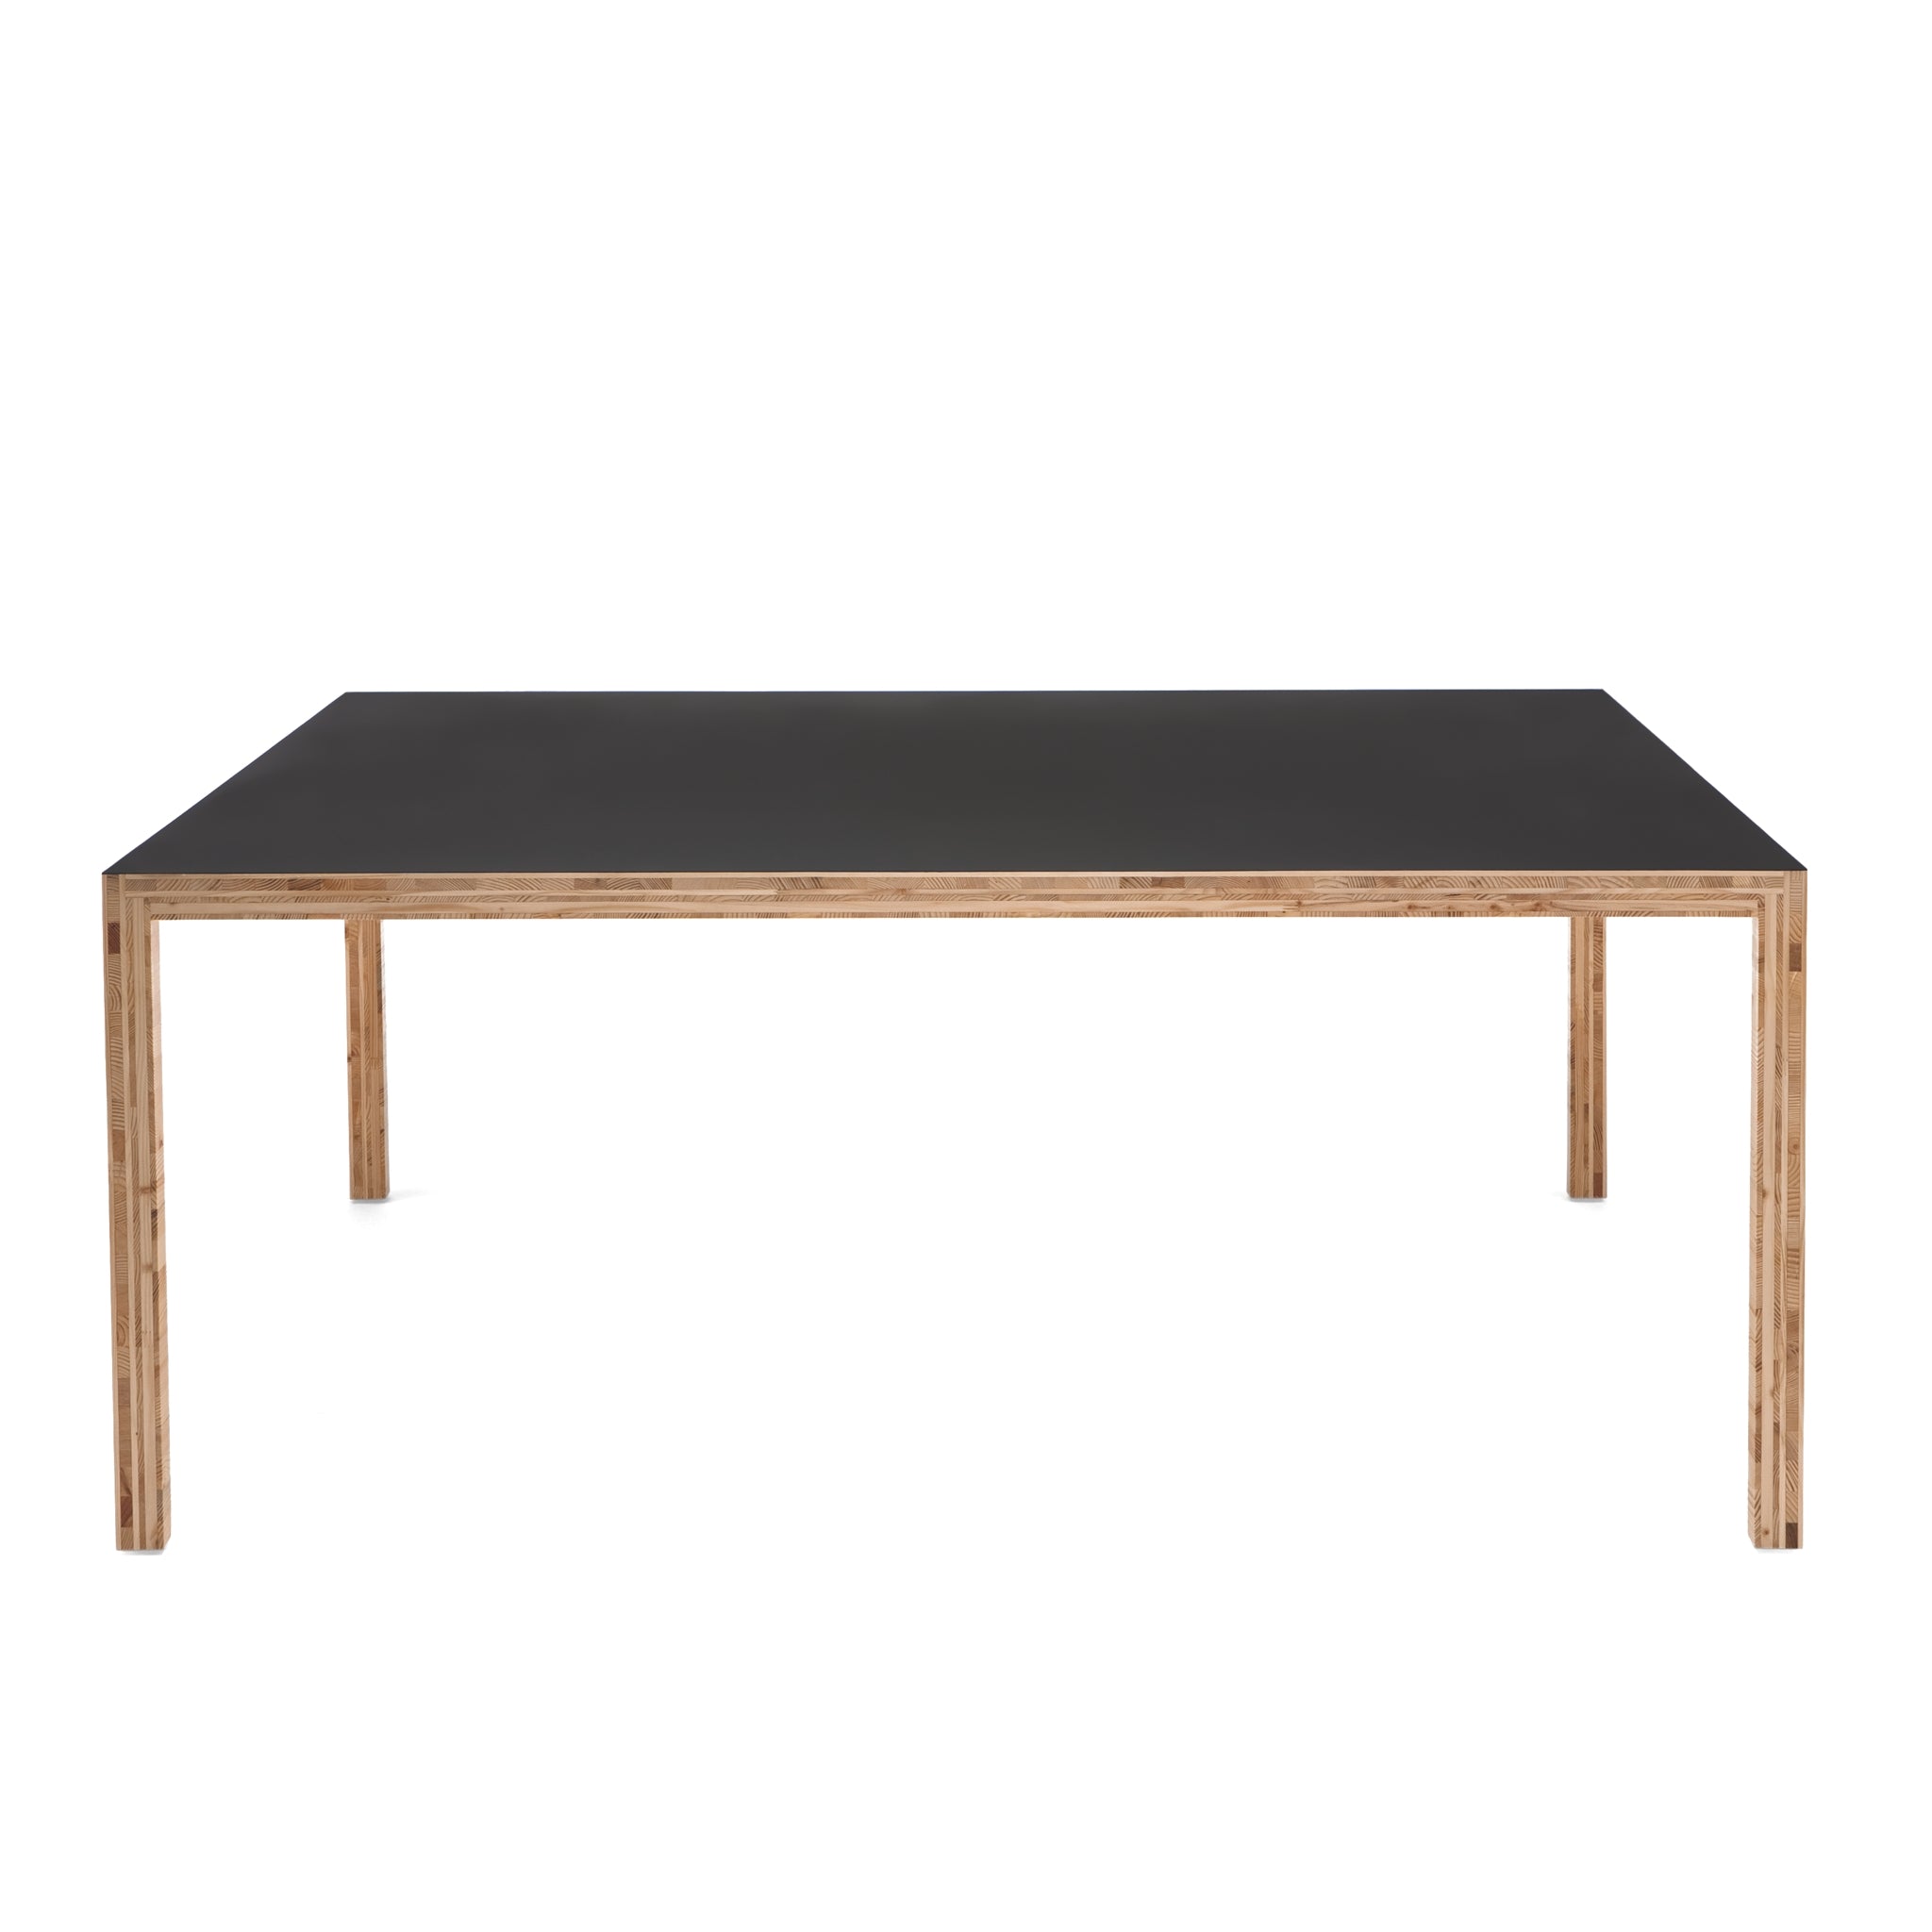 Table by Caruso St John for Established & Sons